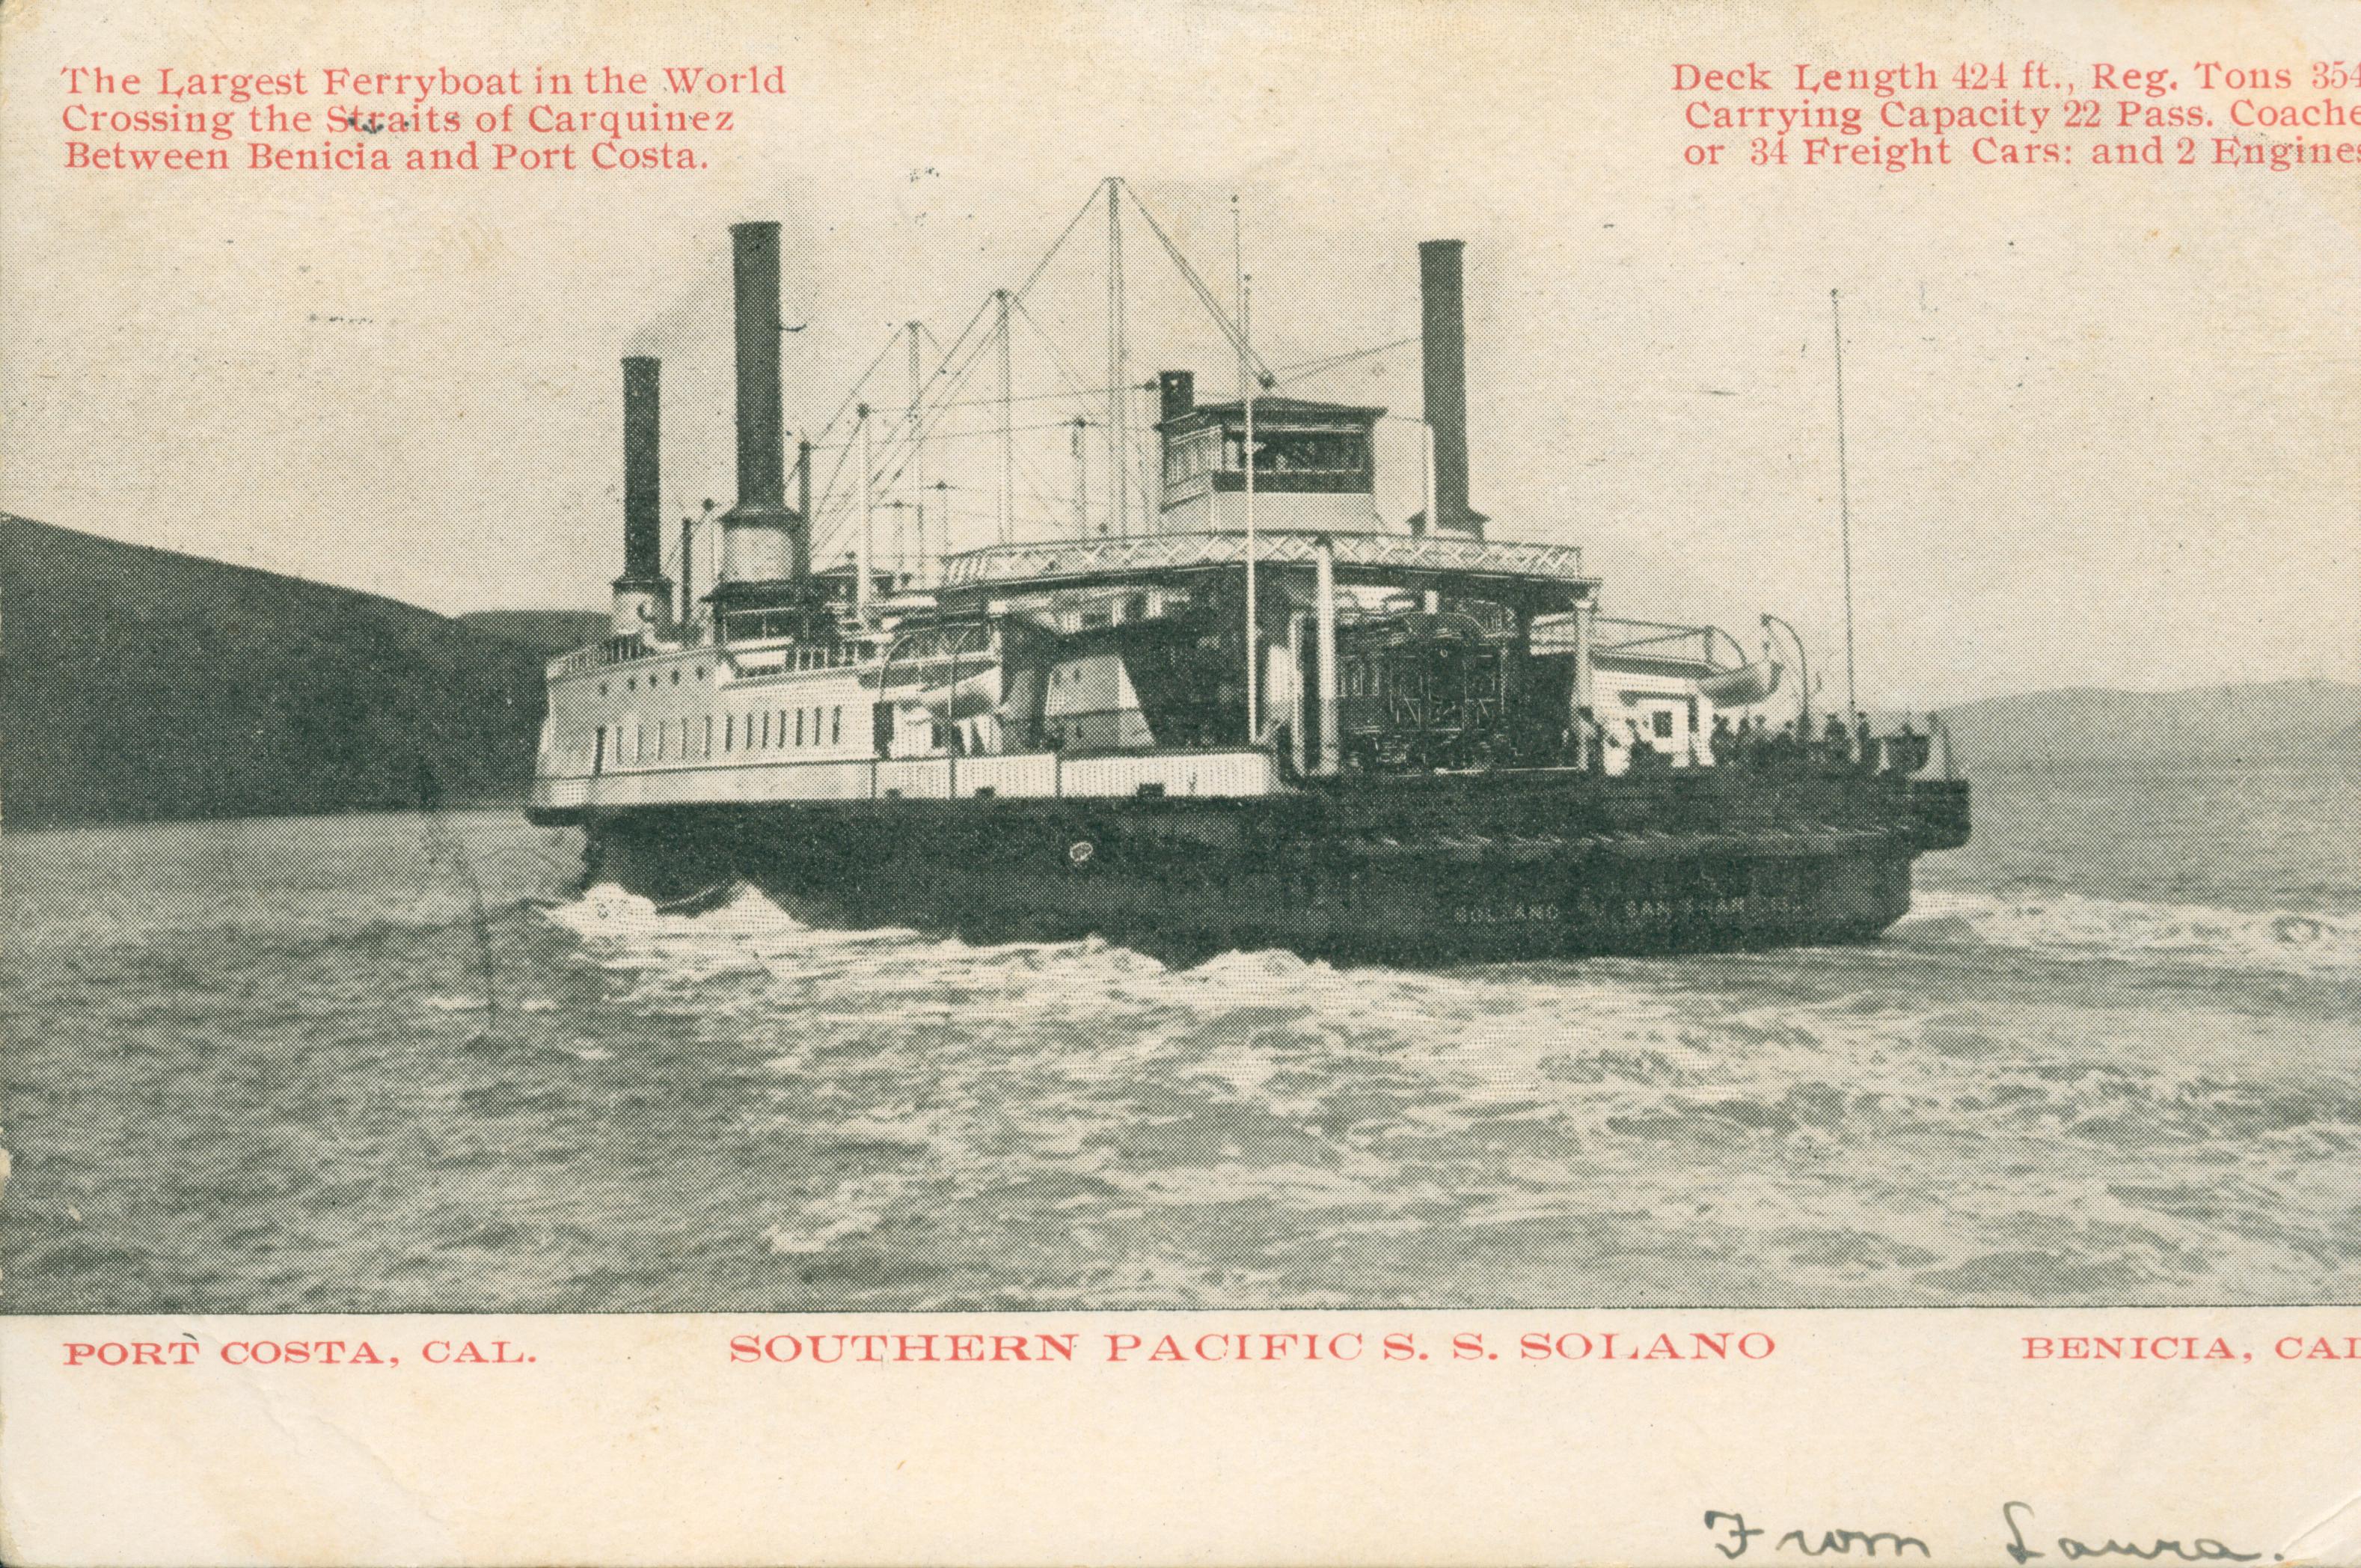 Shows the S.S. Solano carrying an engine across the Carquinez strait.